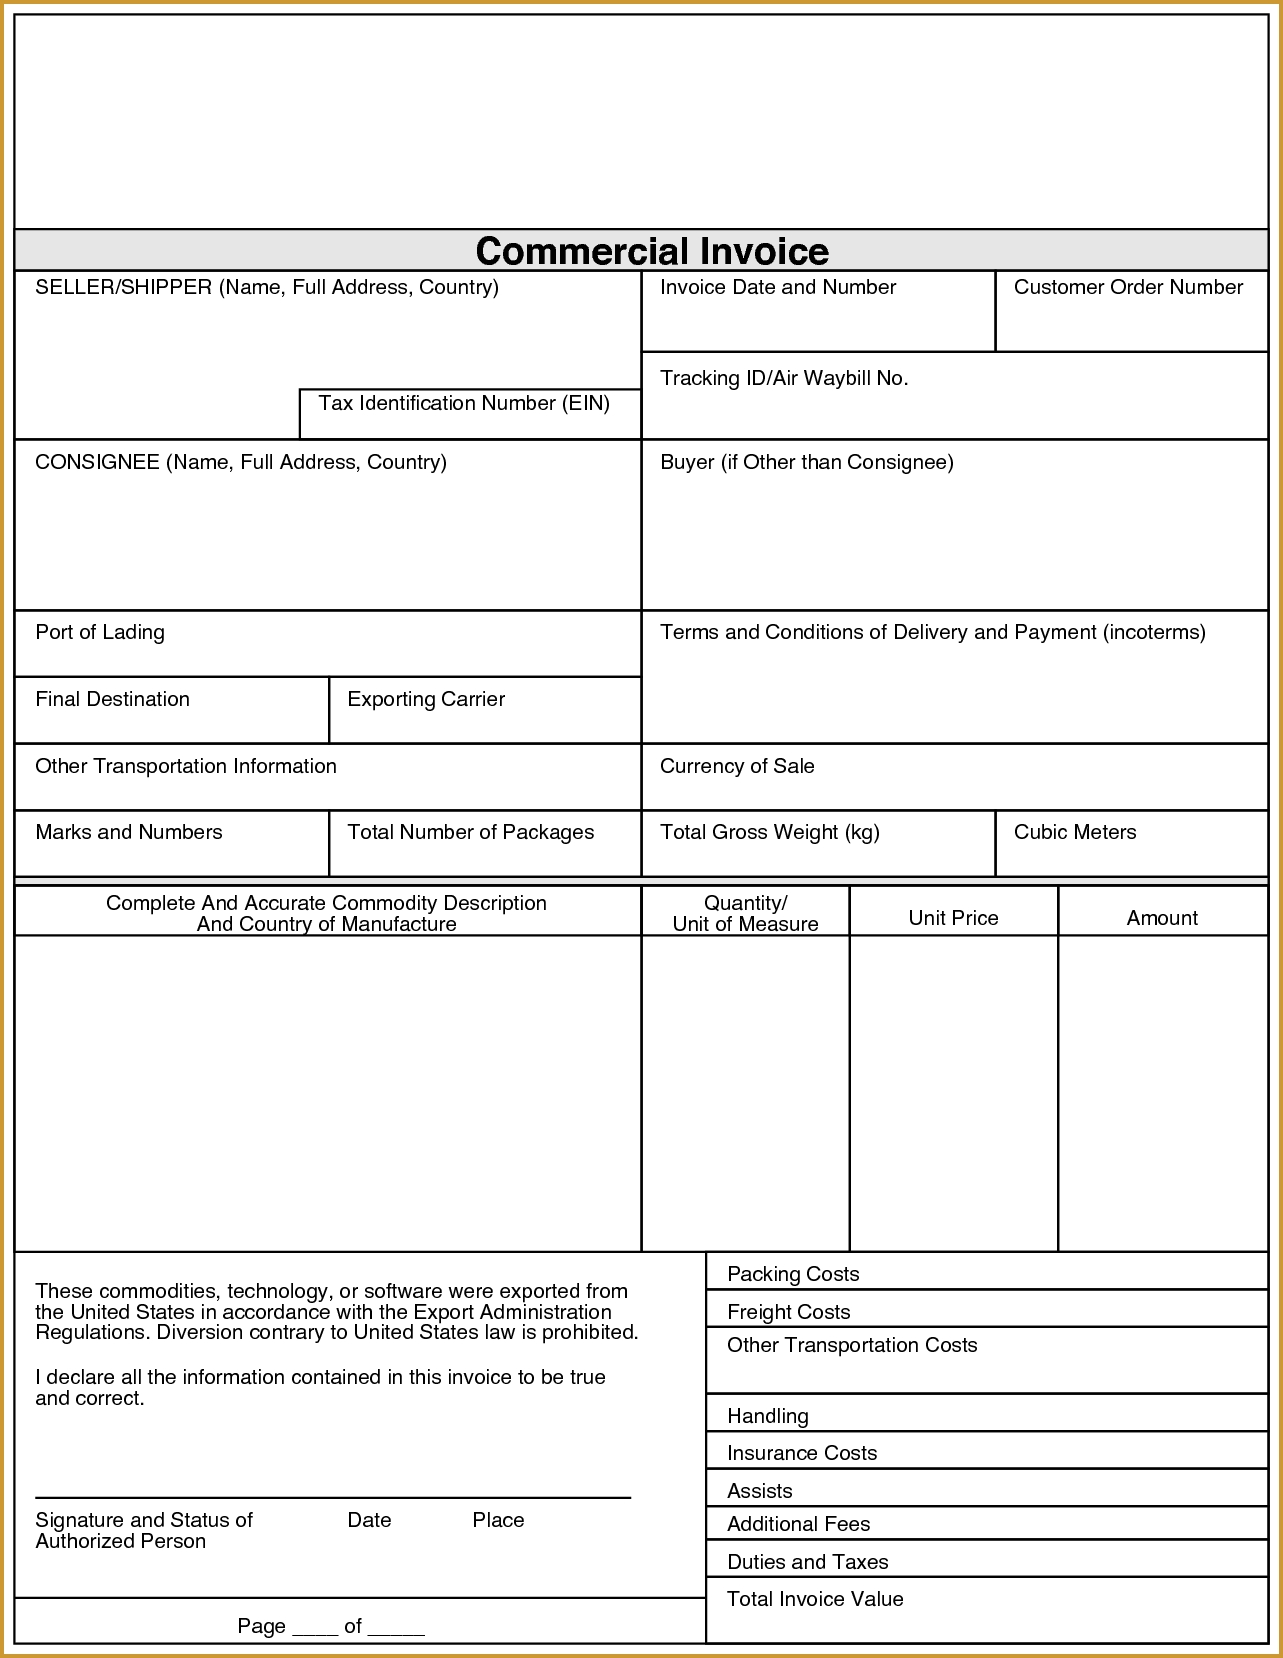 fedex freight commercial invoice 8 fedex commercial invoice jumbocover 1283 X 1658